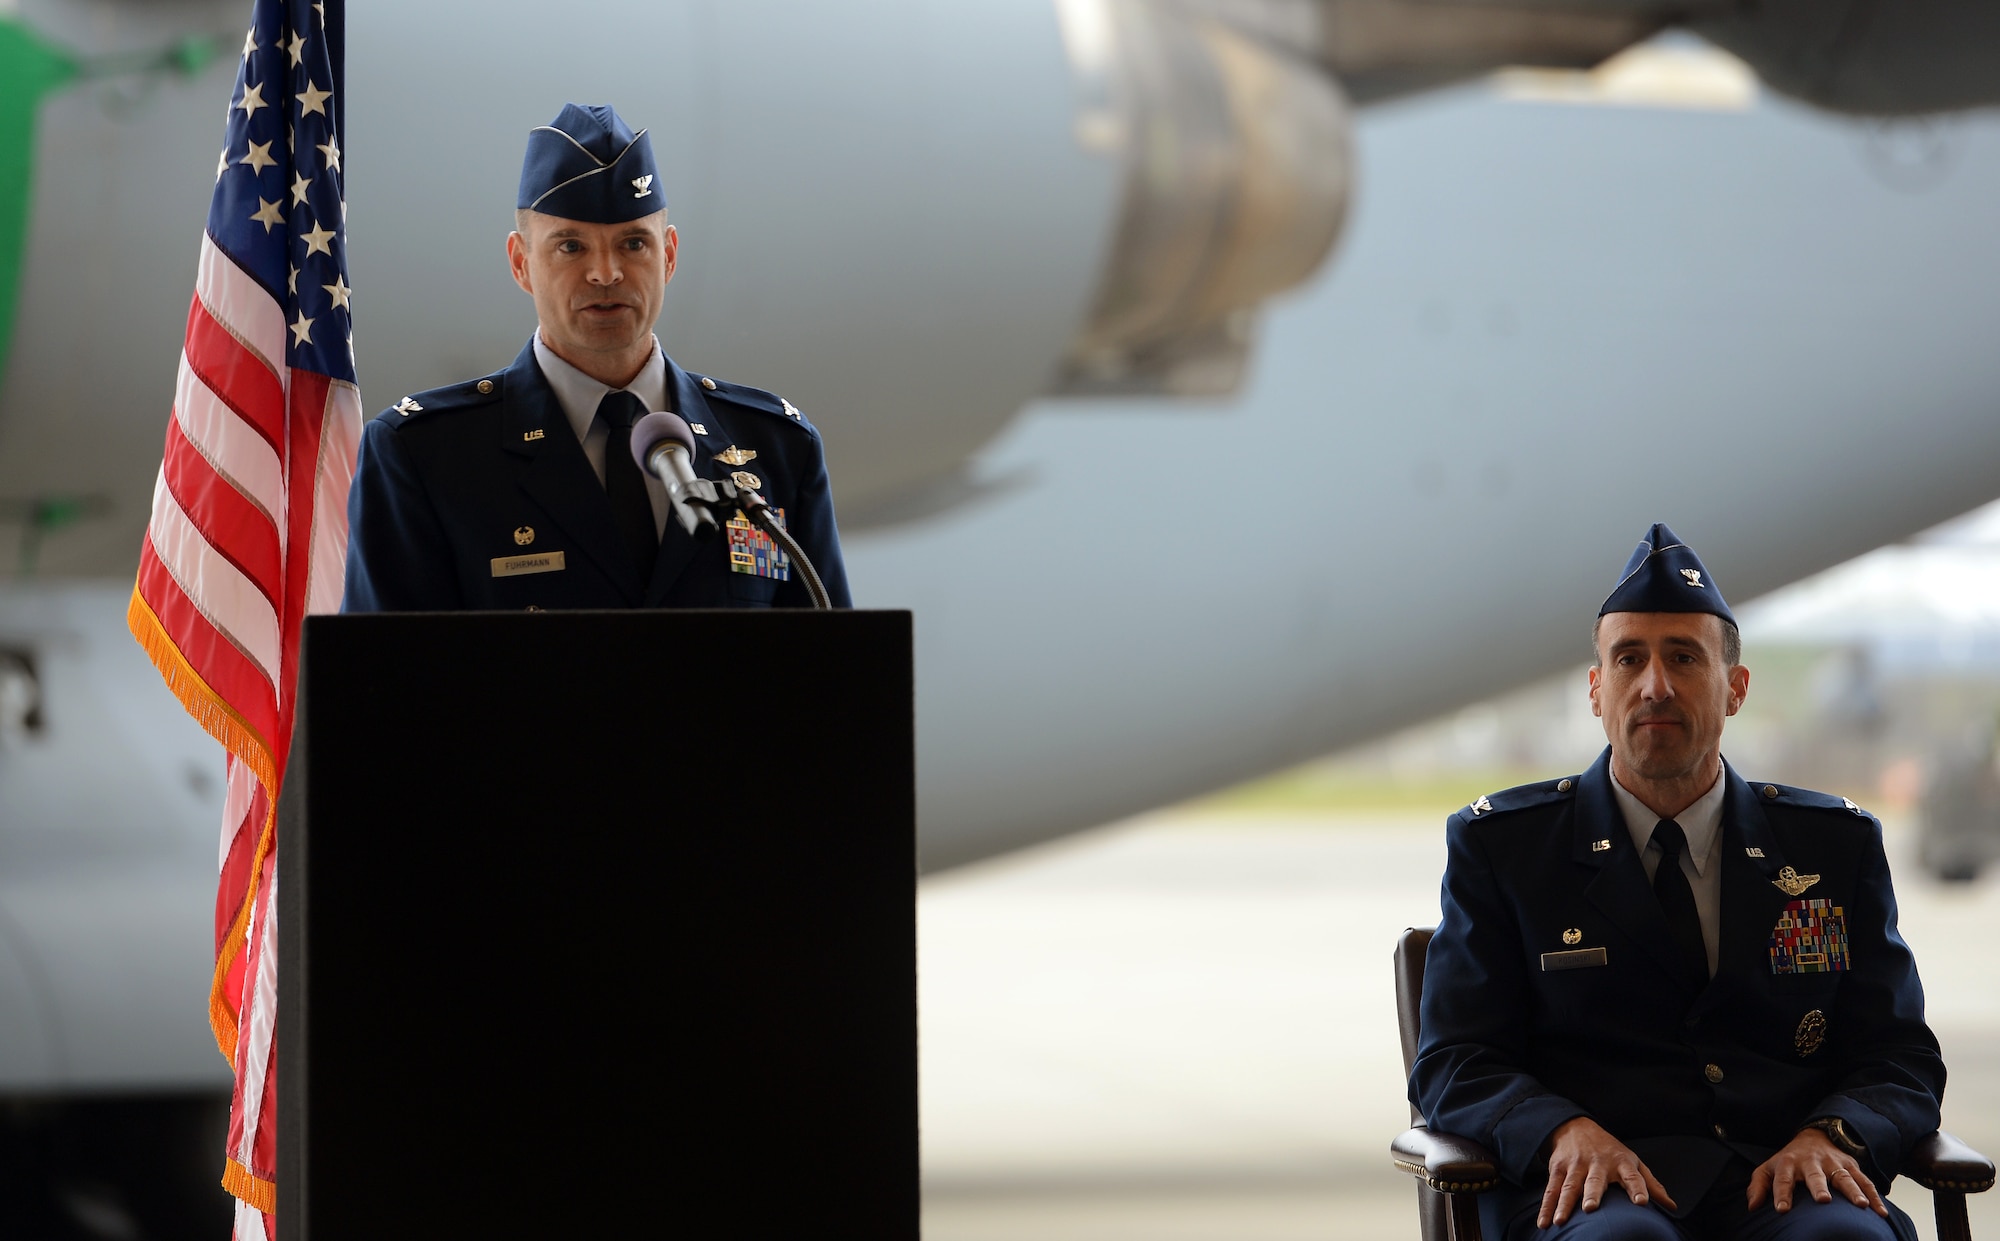 Col. Mark Fuhrmann (left), 62nd Operations Group commander, thanks attendees at the 62nd OG change of command ceremony after taking command May 1, 2017, at Joint Base Lewis-McChord, Wash. A rated command pilot, Fuhrmann holds more than 3,200 flight hours in the T-37, T1-A, C-141B Starlifter and C-17 Globemaster III aircraft. (U.S. Air Force photo/Senior Airman Jacob Jimenez) 